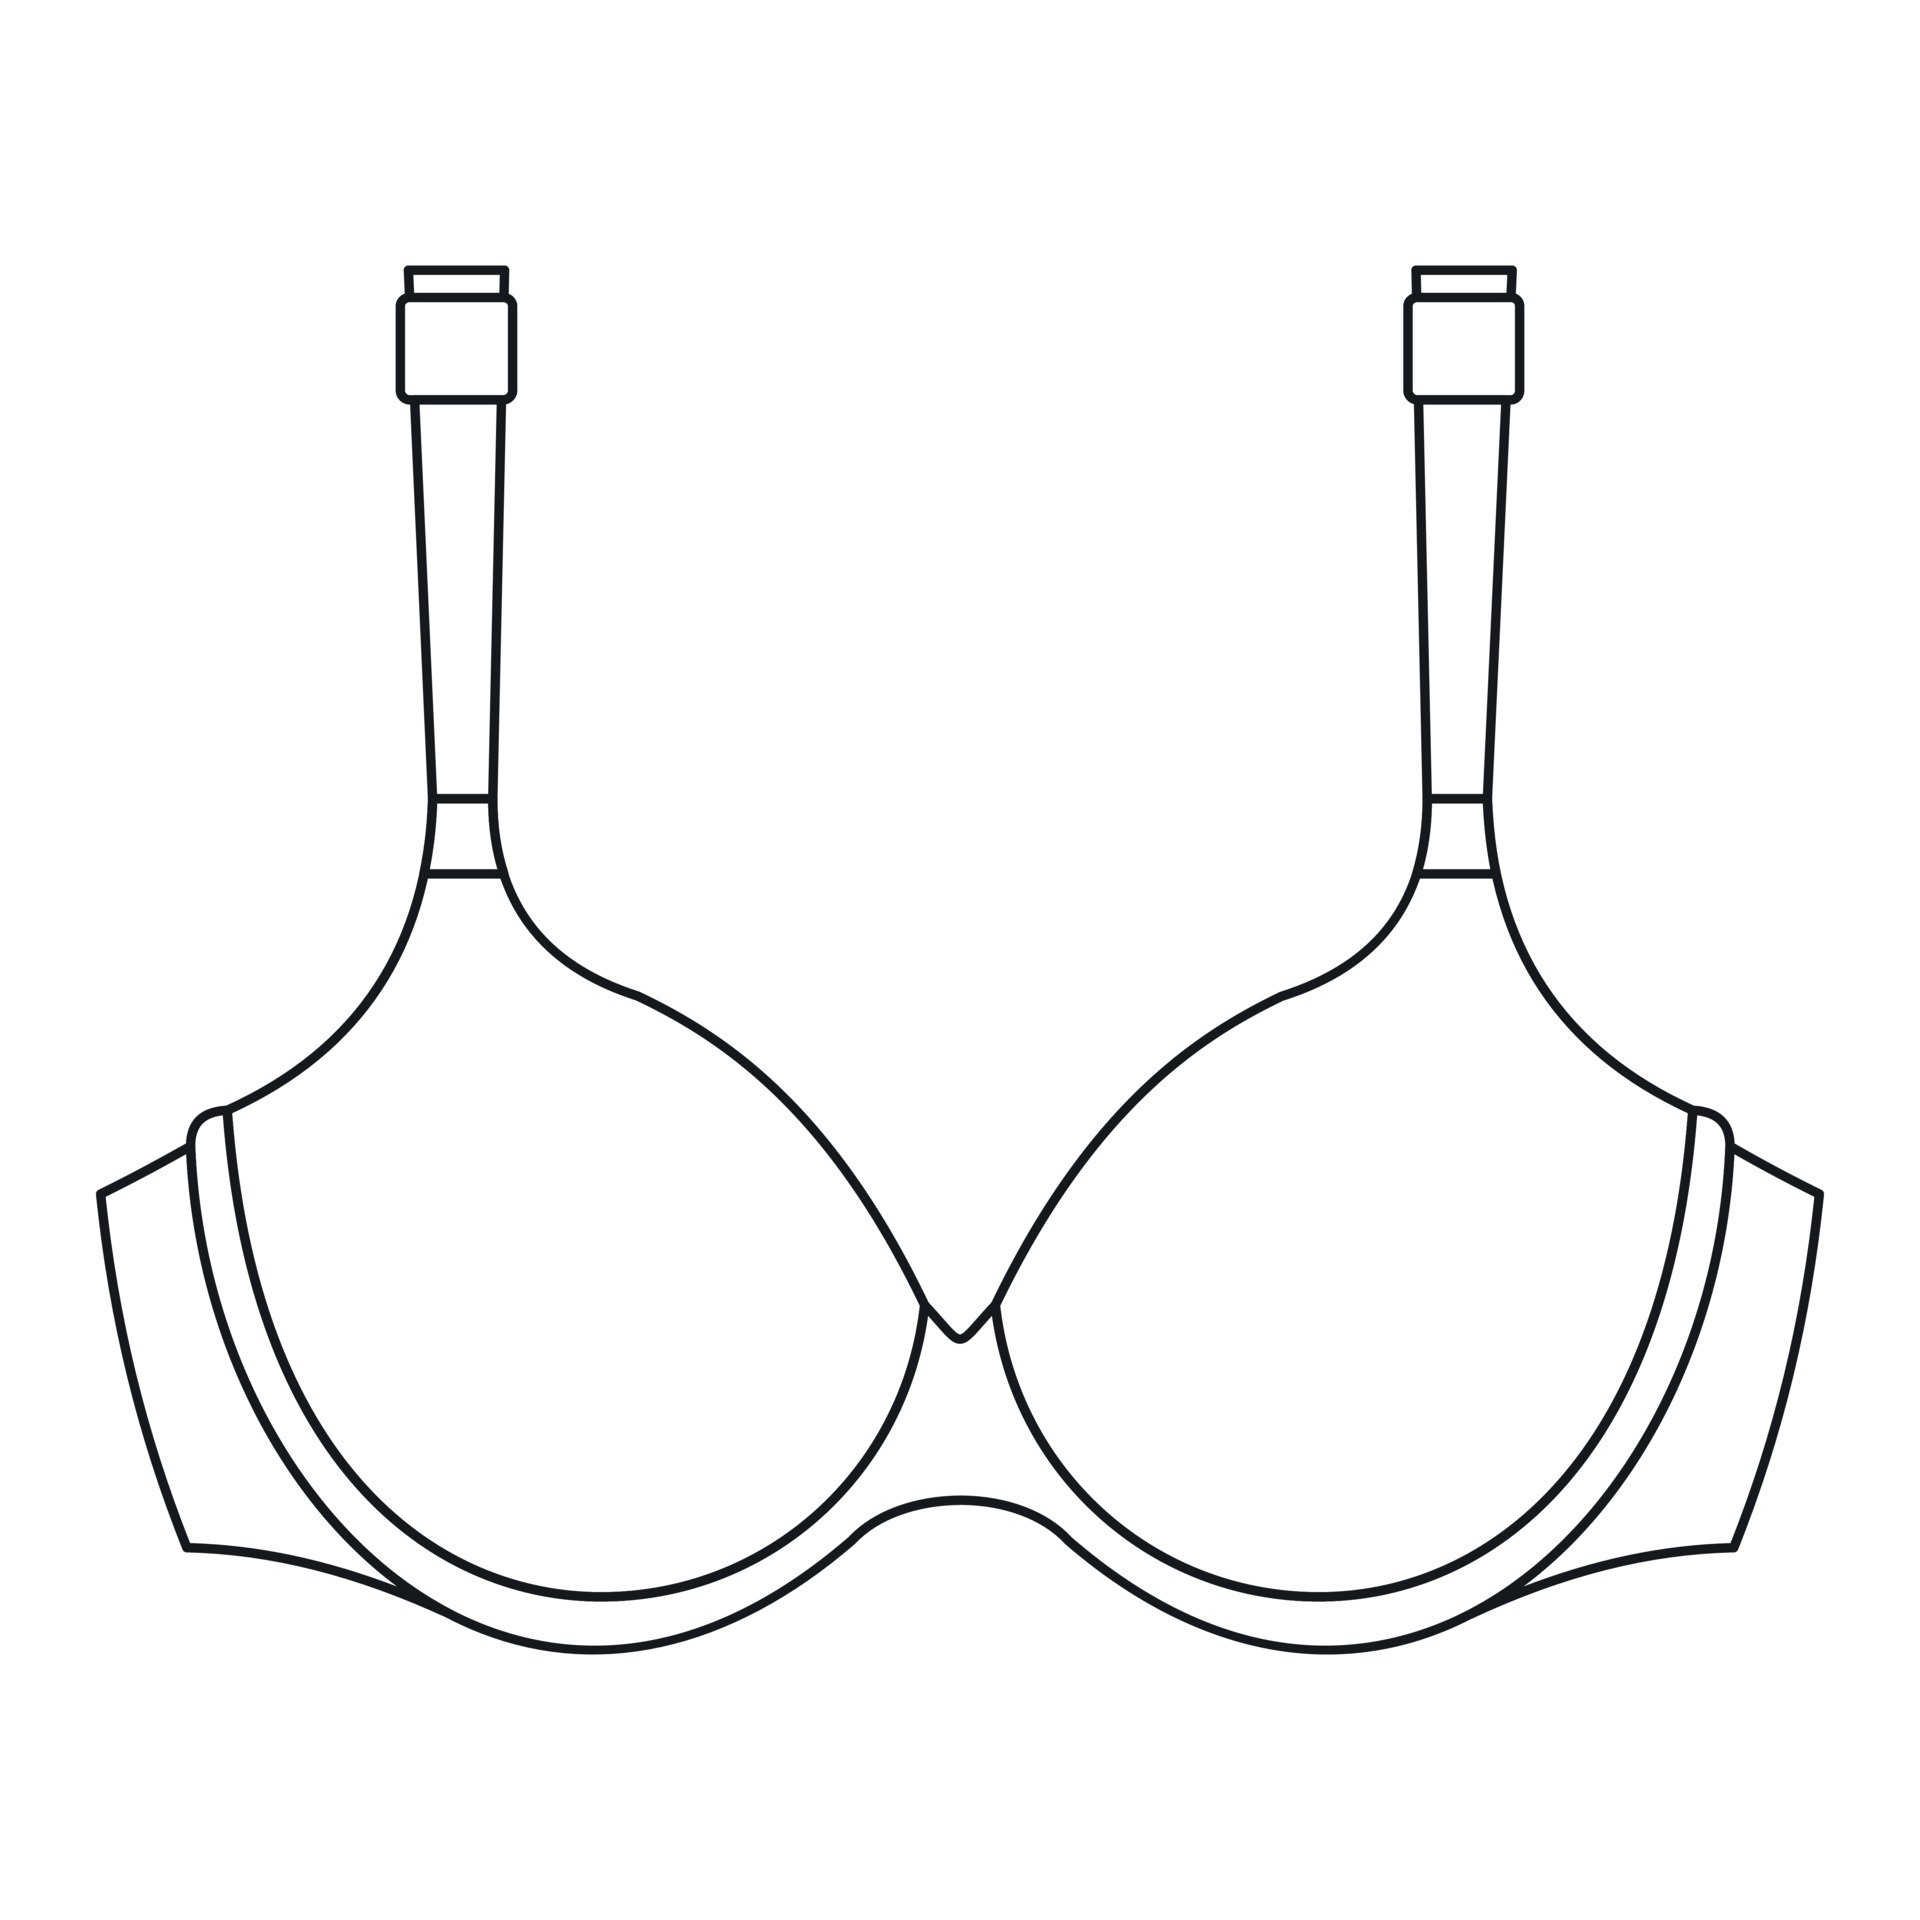 https://static.vecteezy.com/system/resources/previews/015/222/130/original/padded-bra-icon-outline-style-vector.jpg